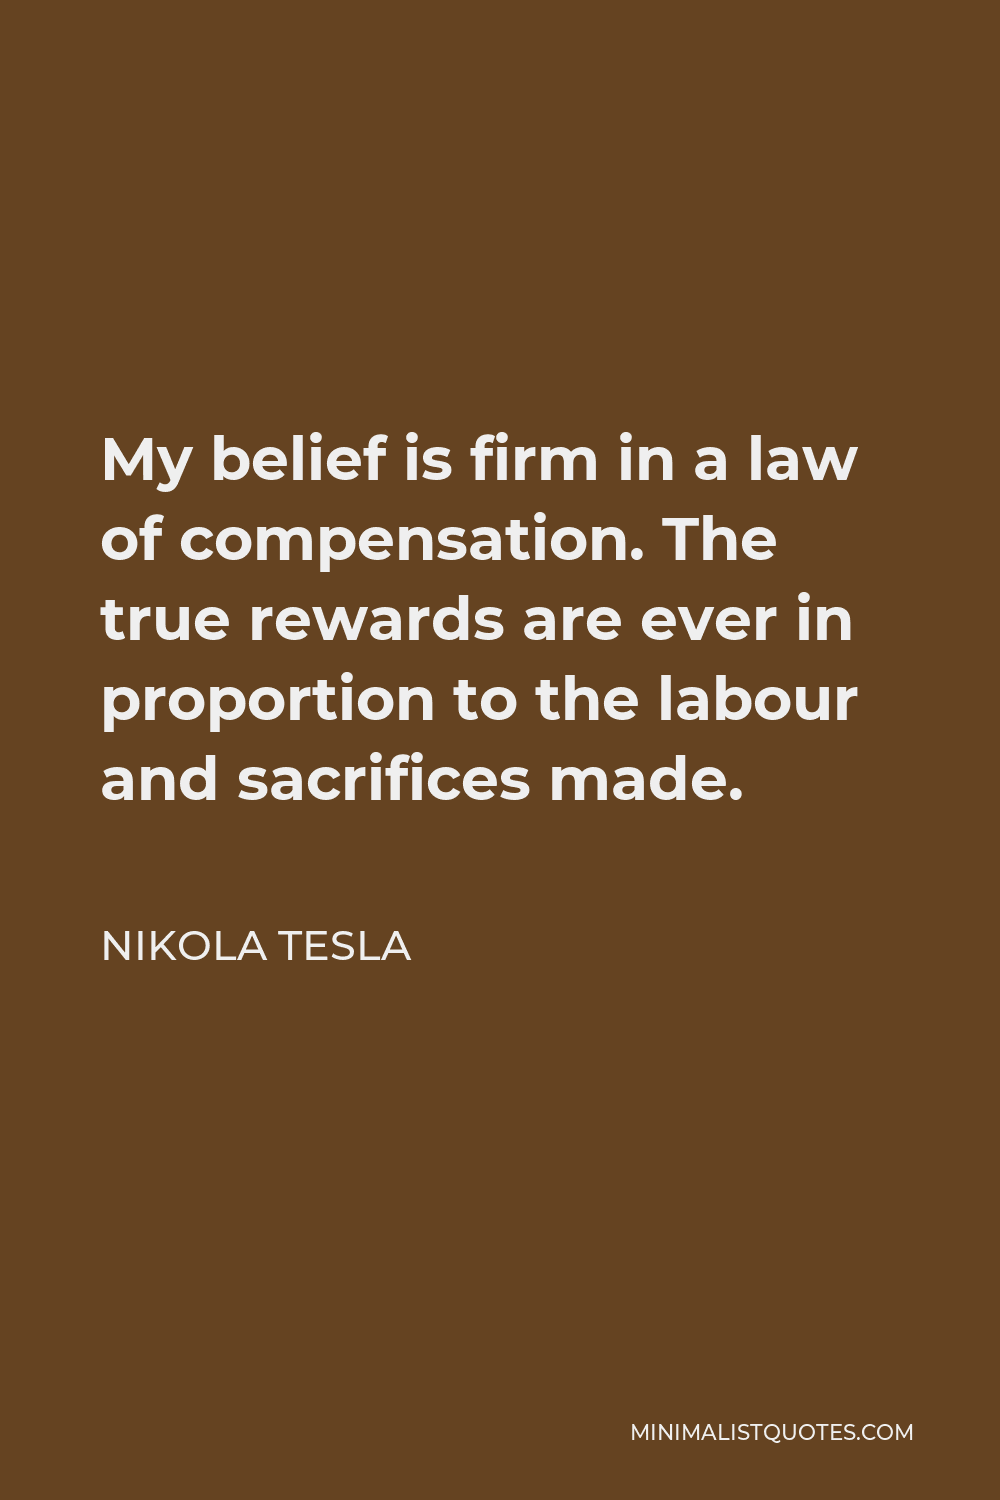 Nikola Tesla Quote - My belief is firm in a law of compensation. The true rewards are ever in proportion to the labour and sacrifices made.